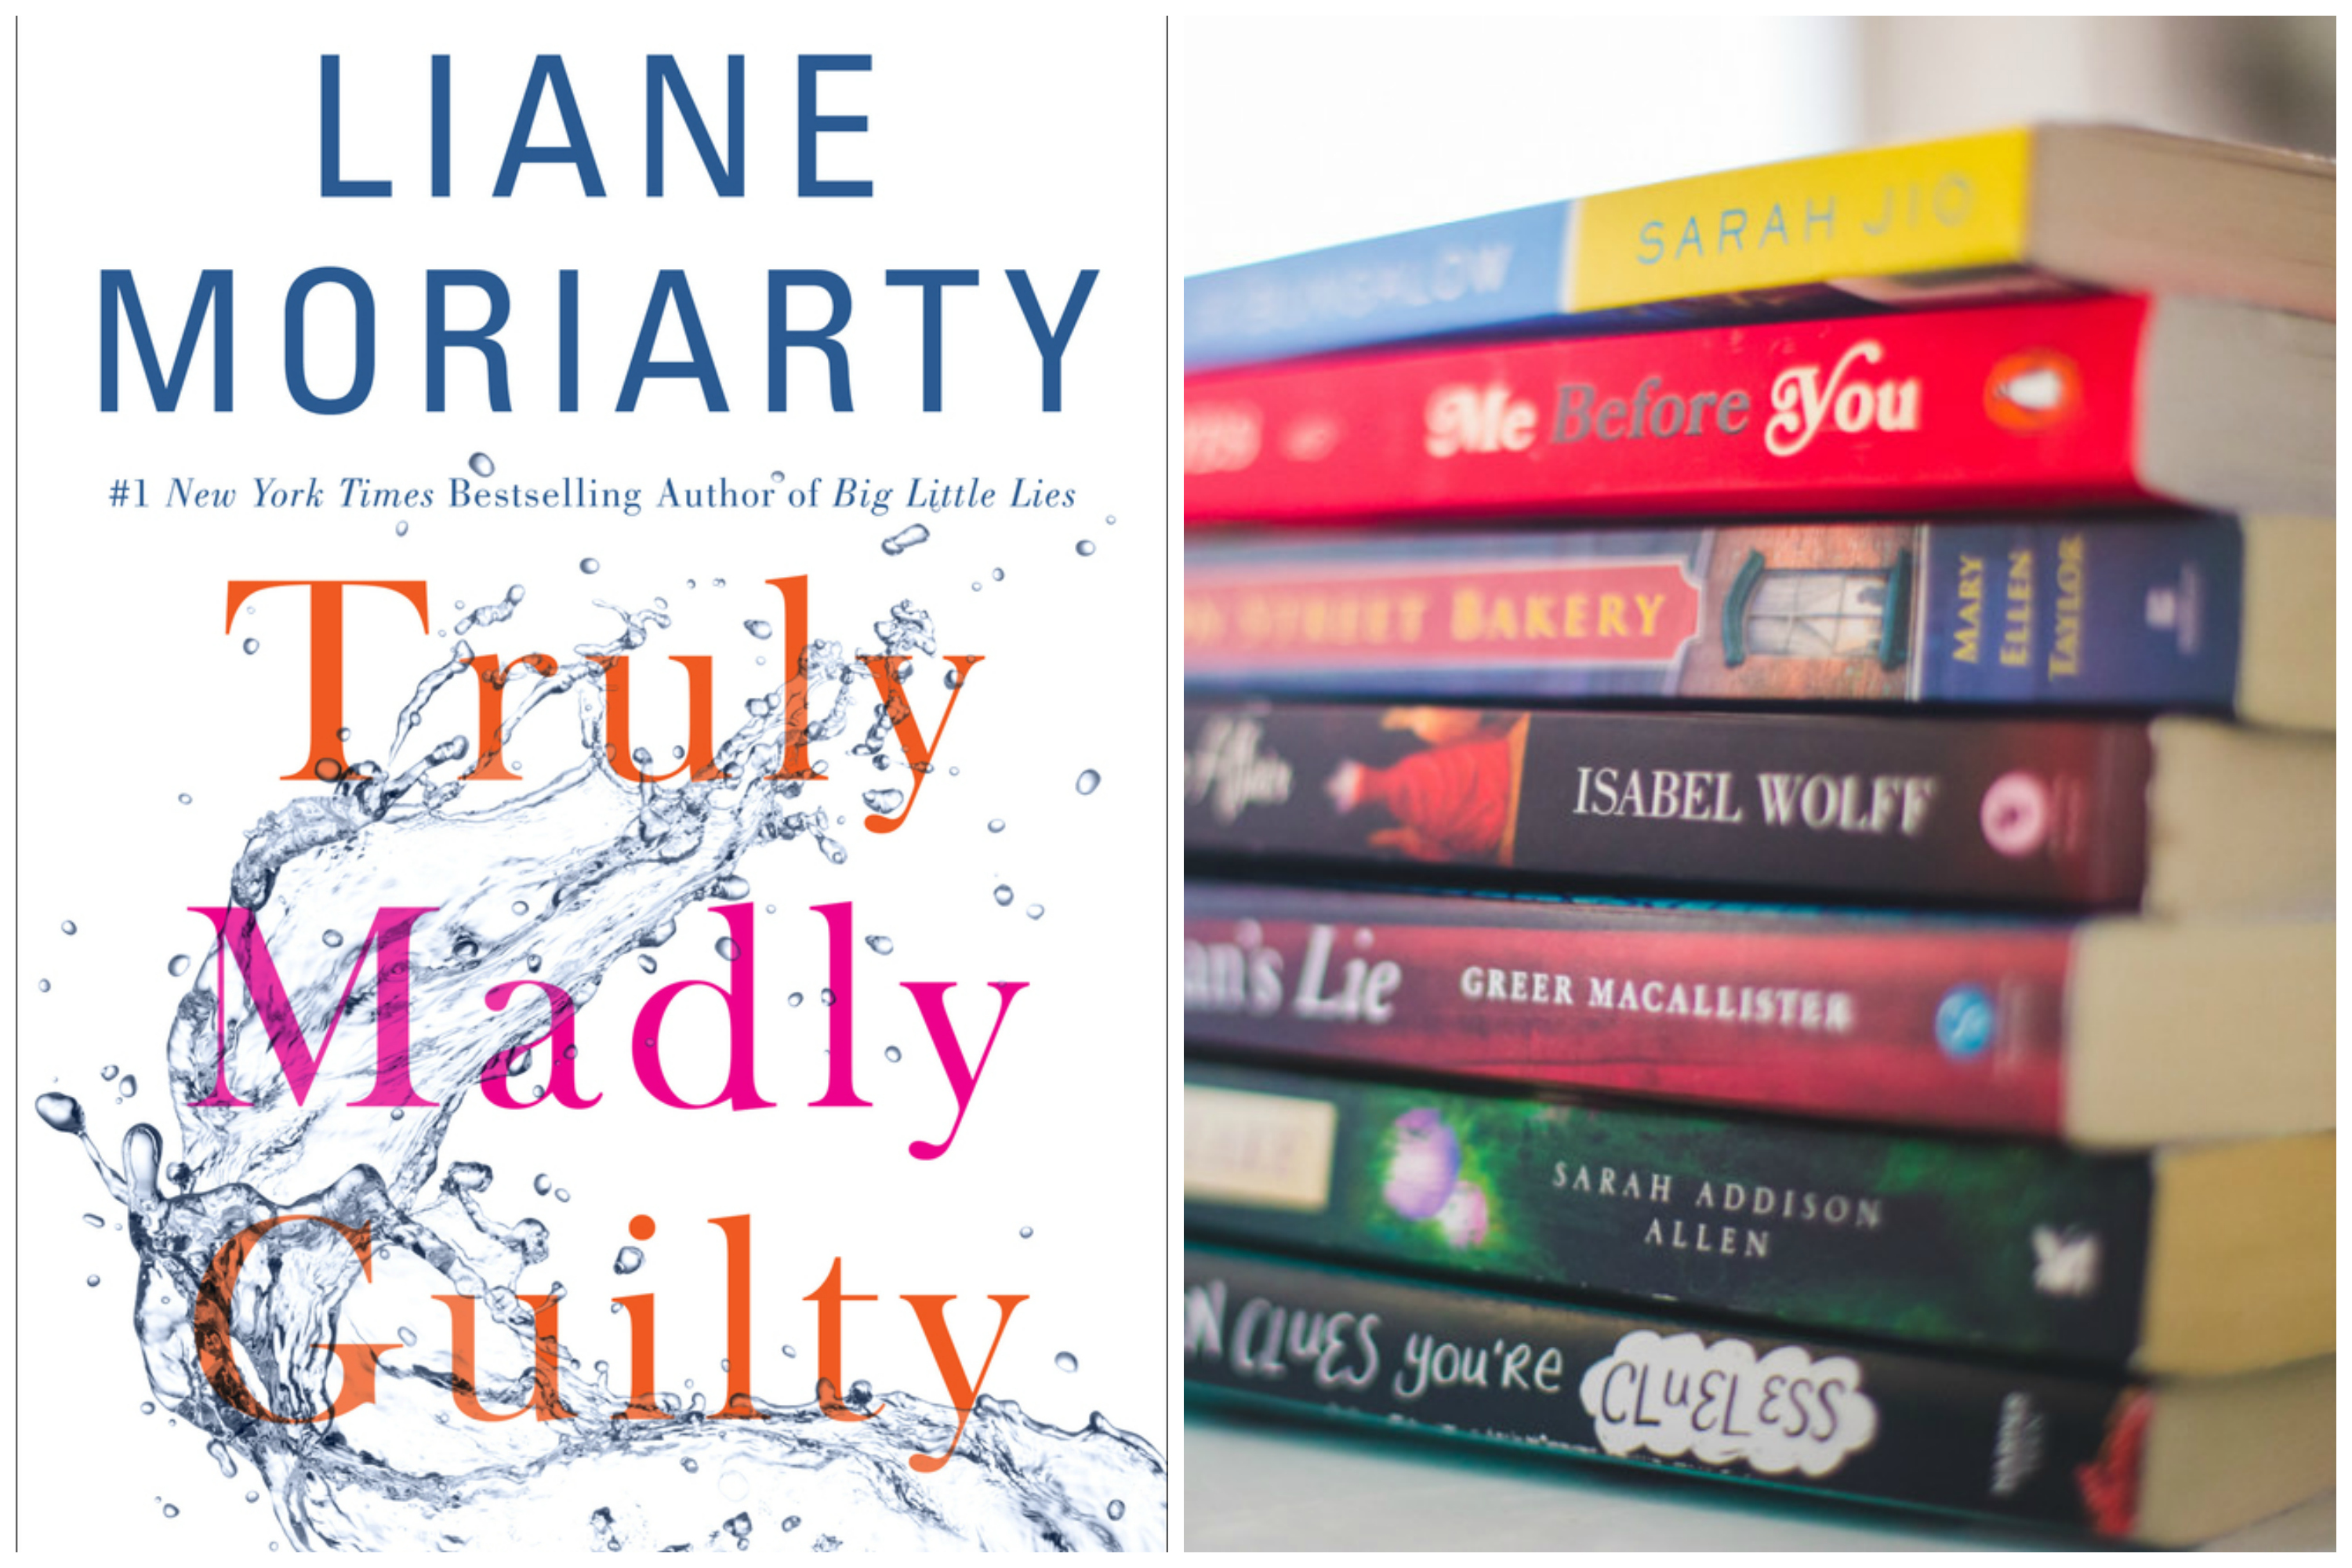 truly madly guilty series